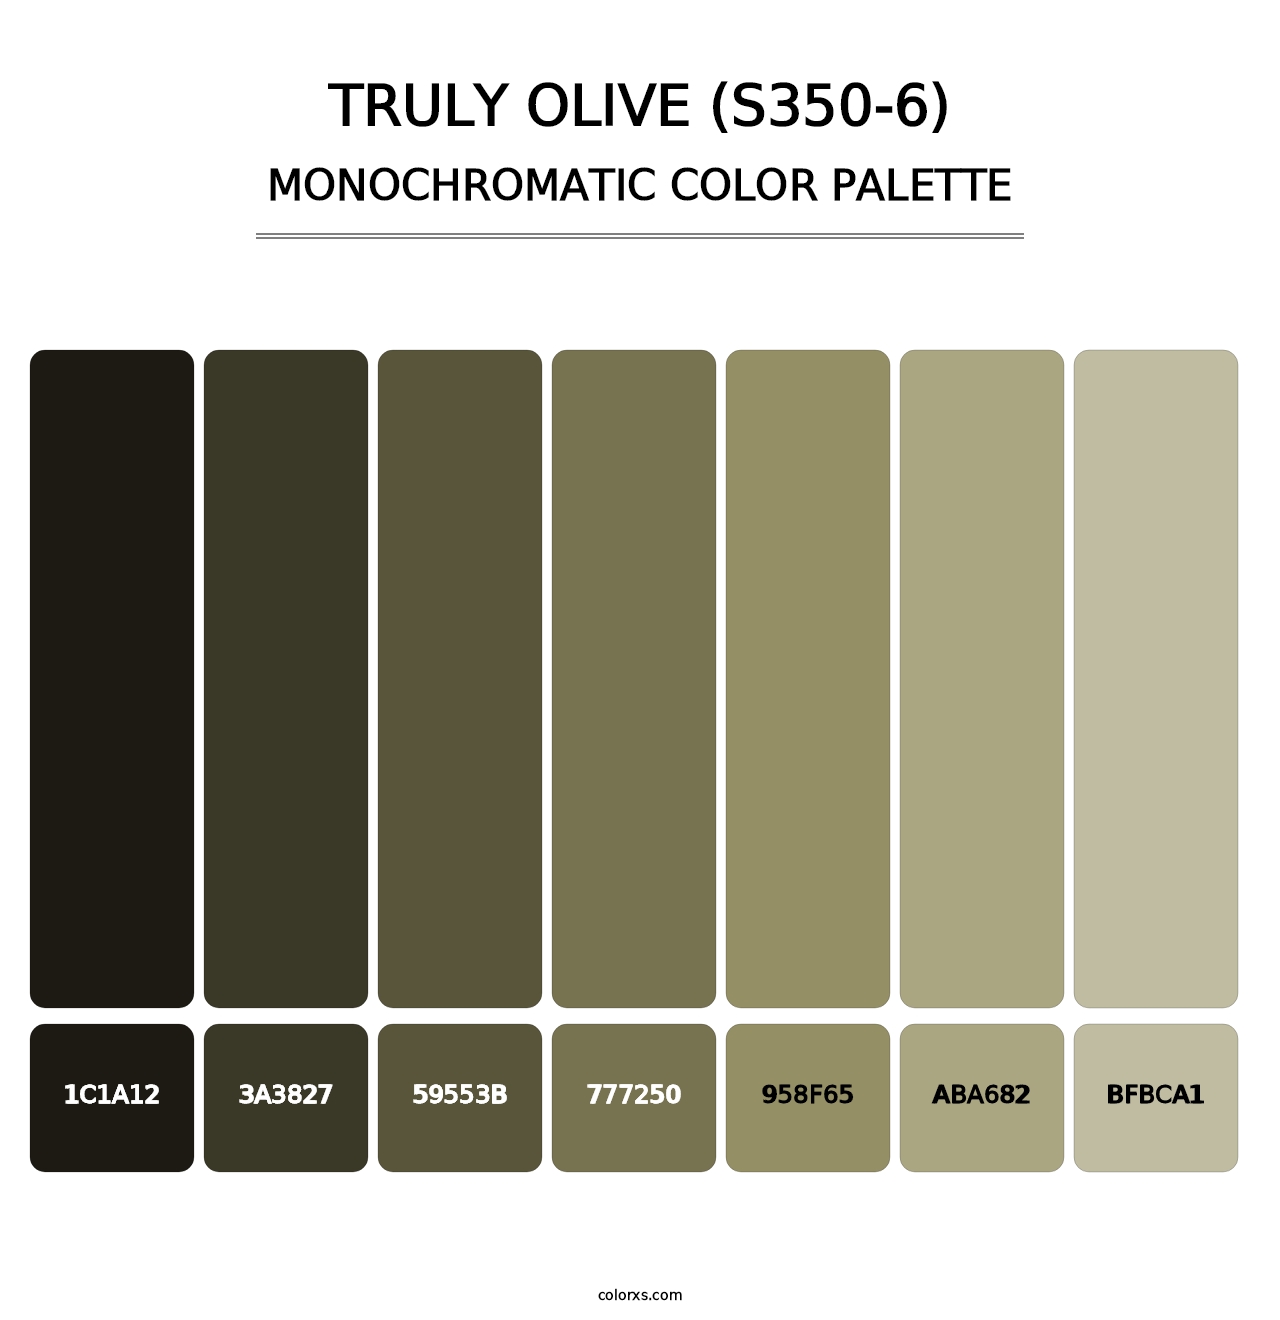 Truly Olive (S350-6) - Monochromatic Color Palette